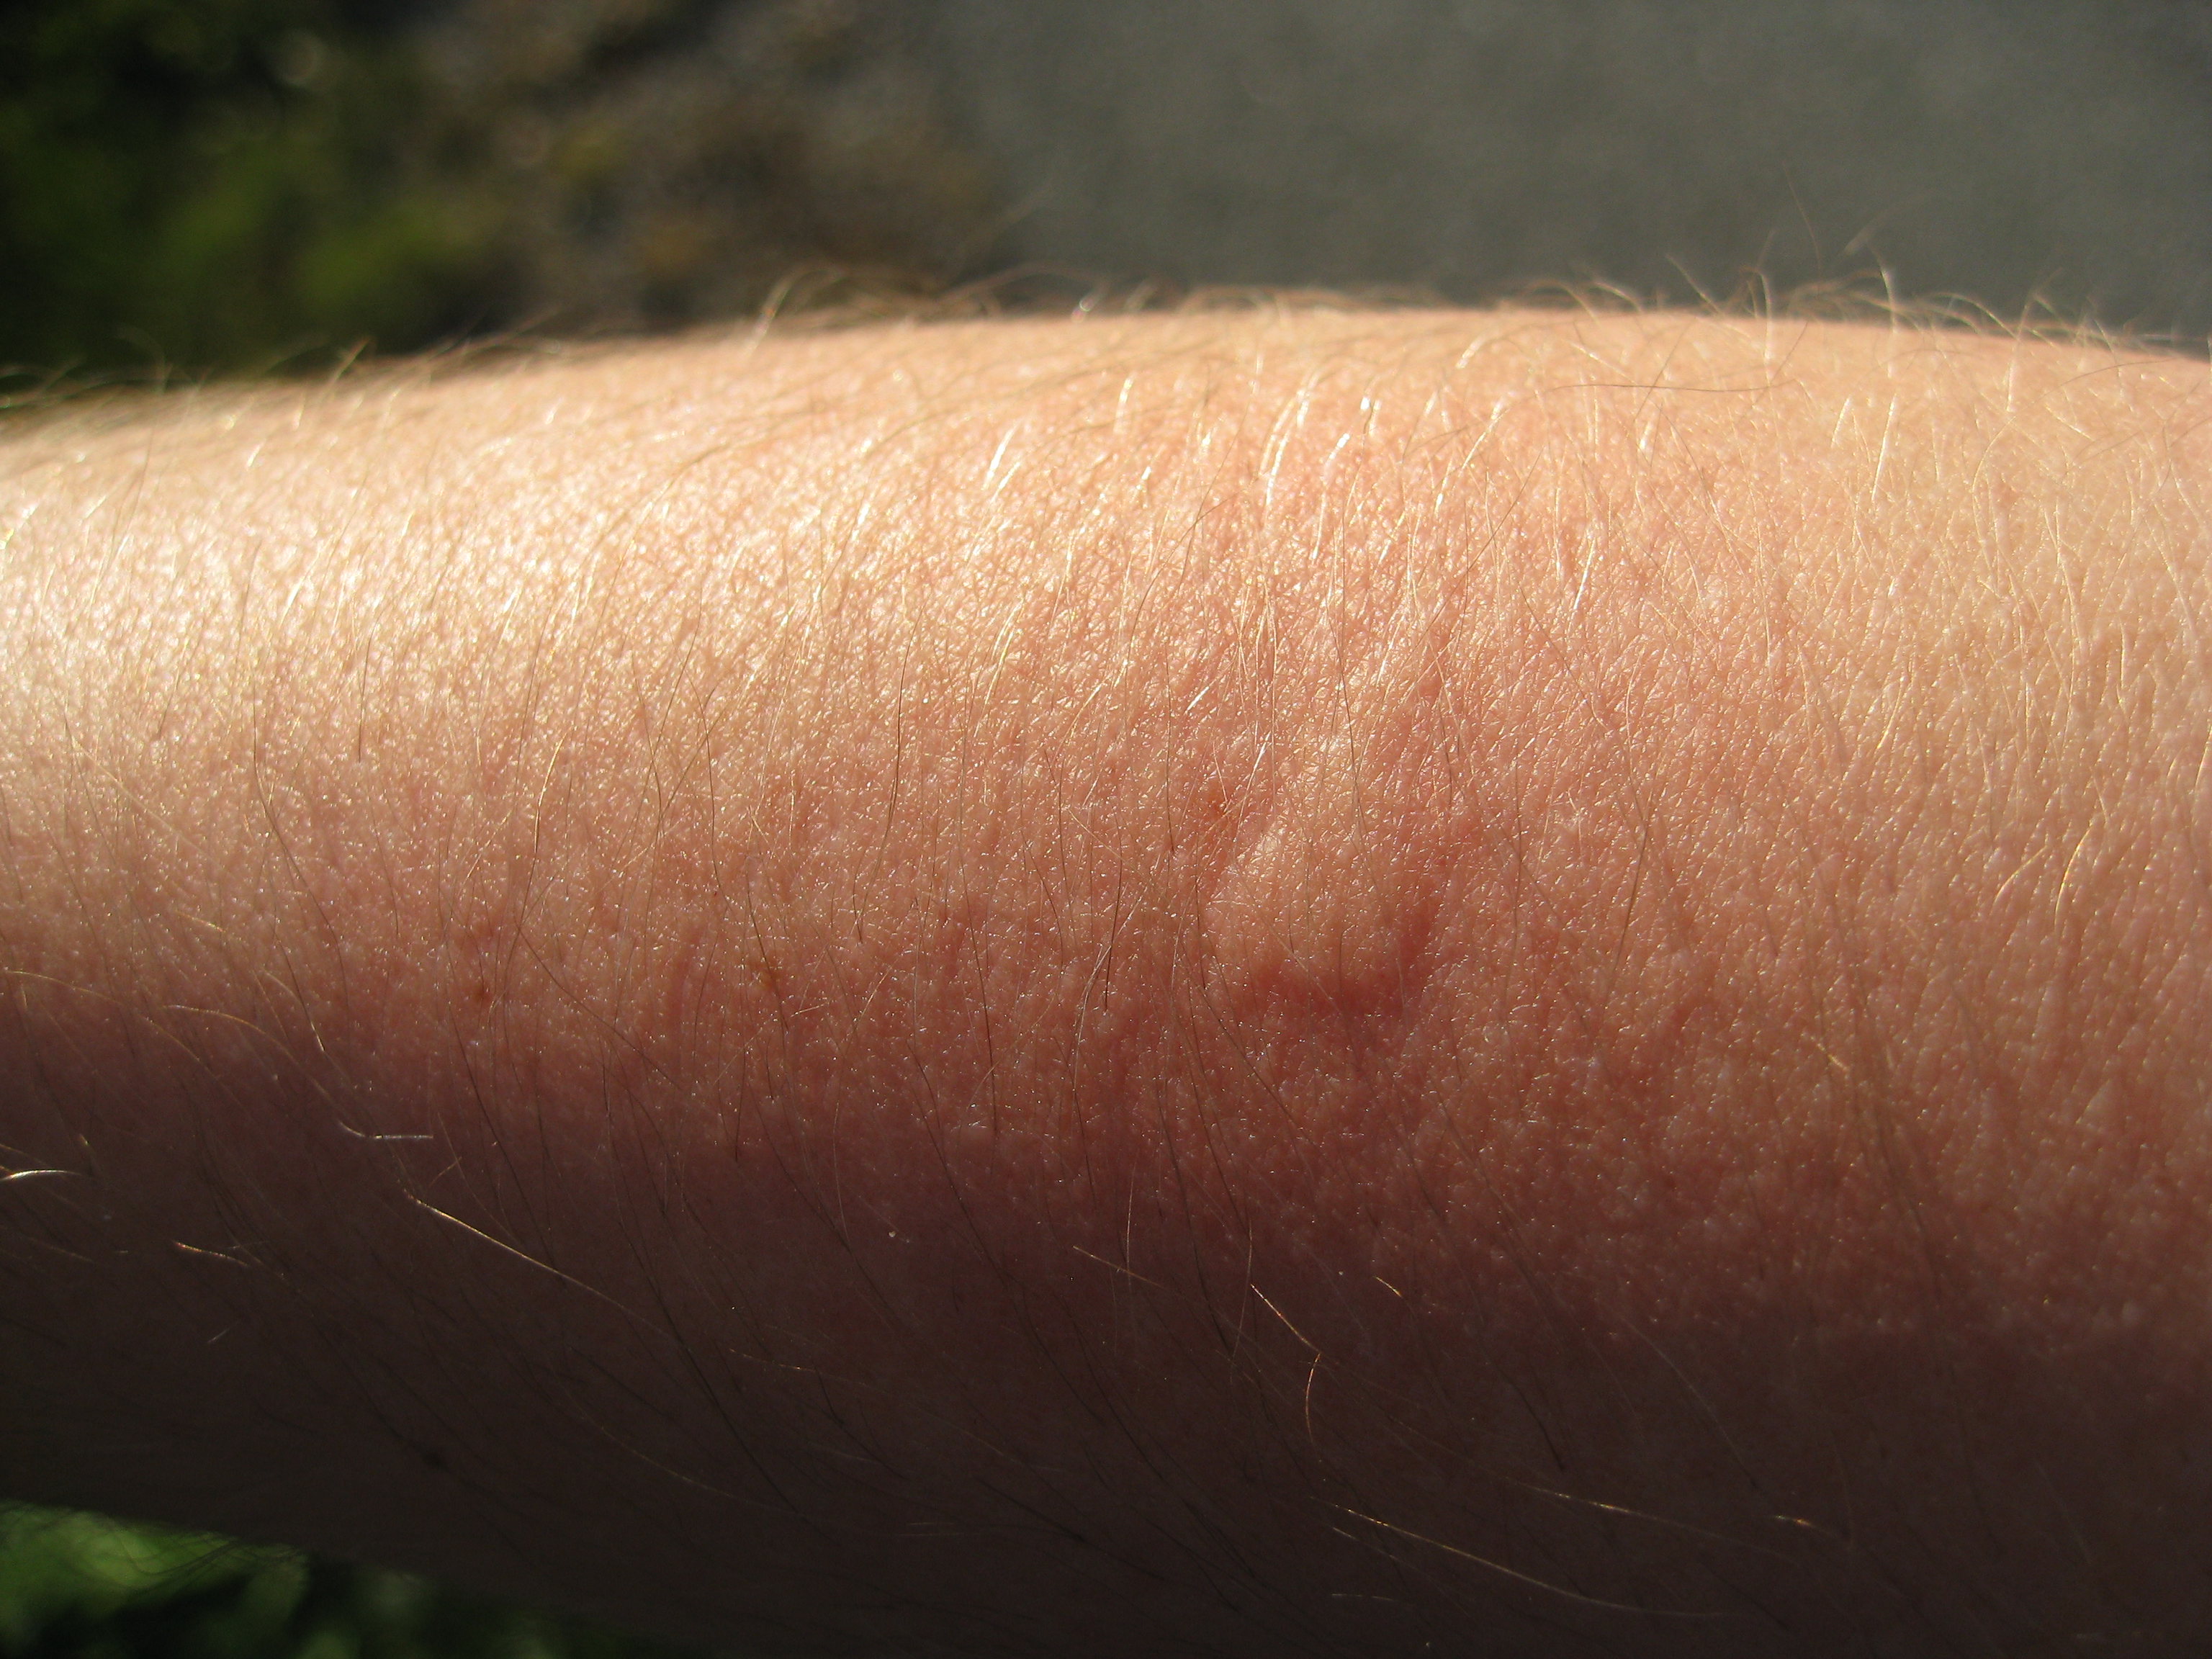 First mosquito bite 2010, 15 minutes later